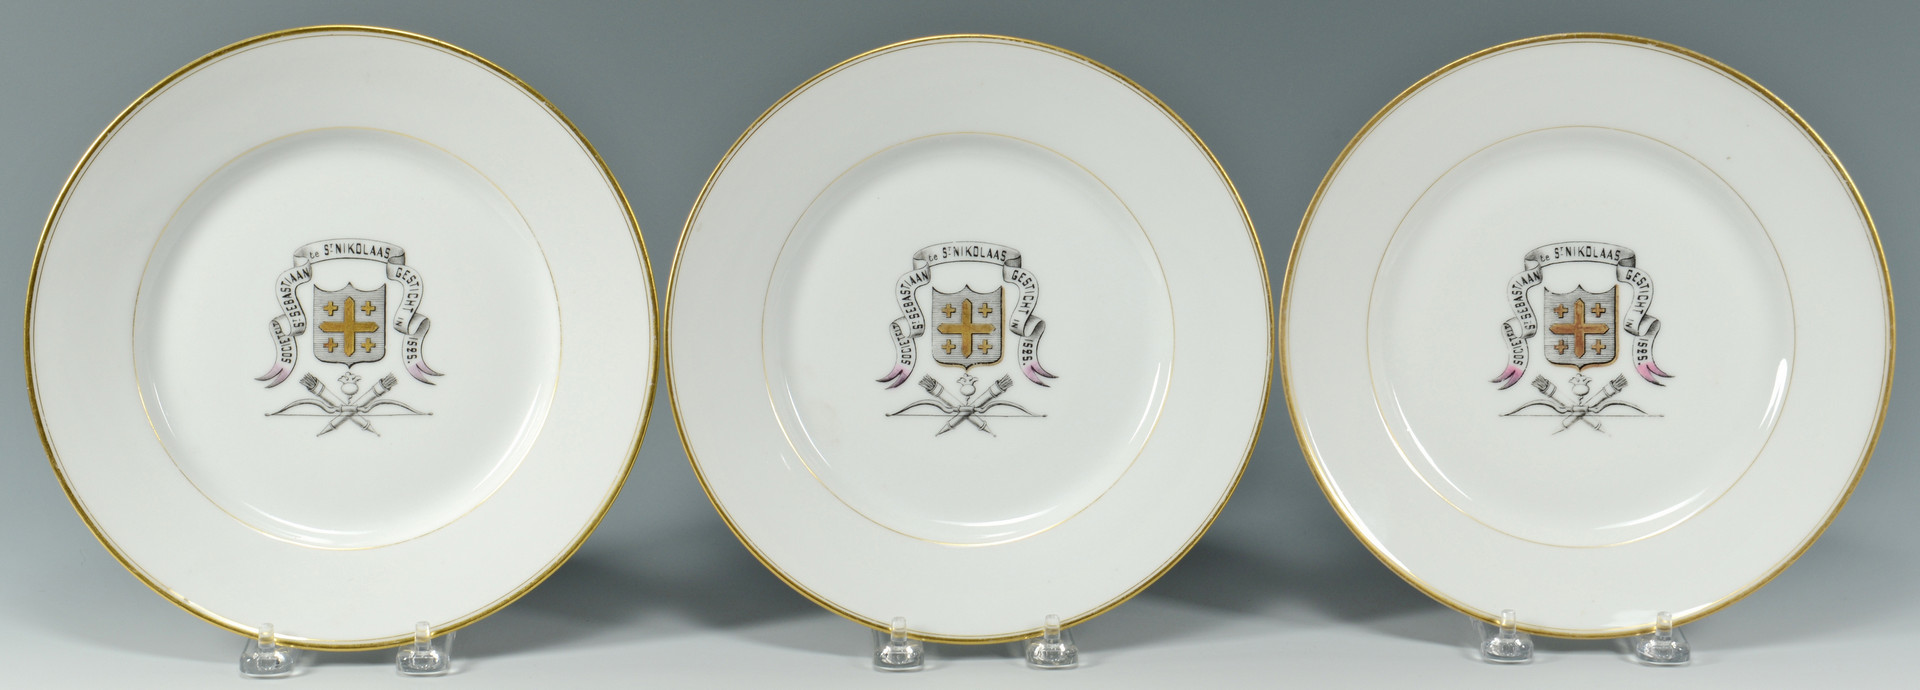 Lot 889: 6 Armorial Plates